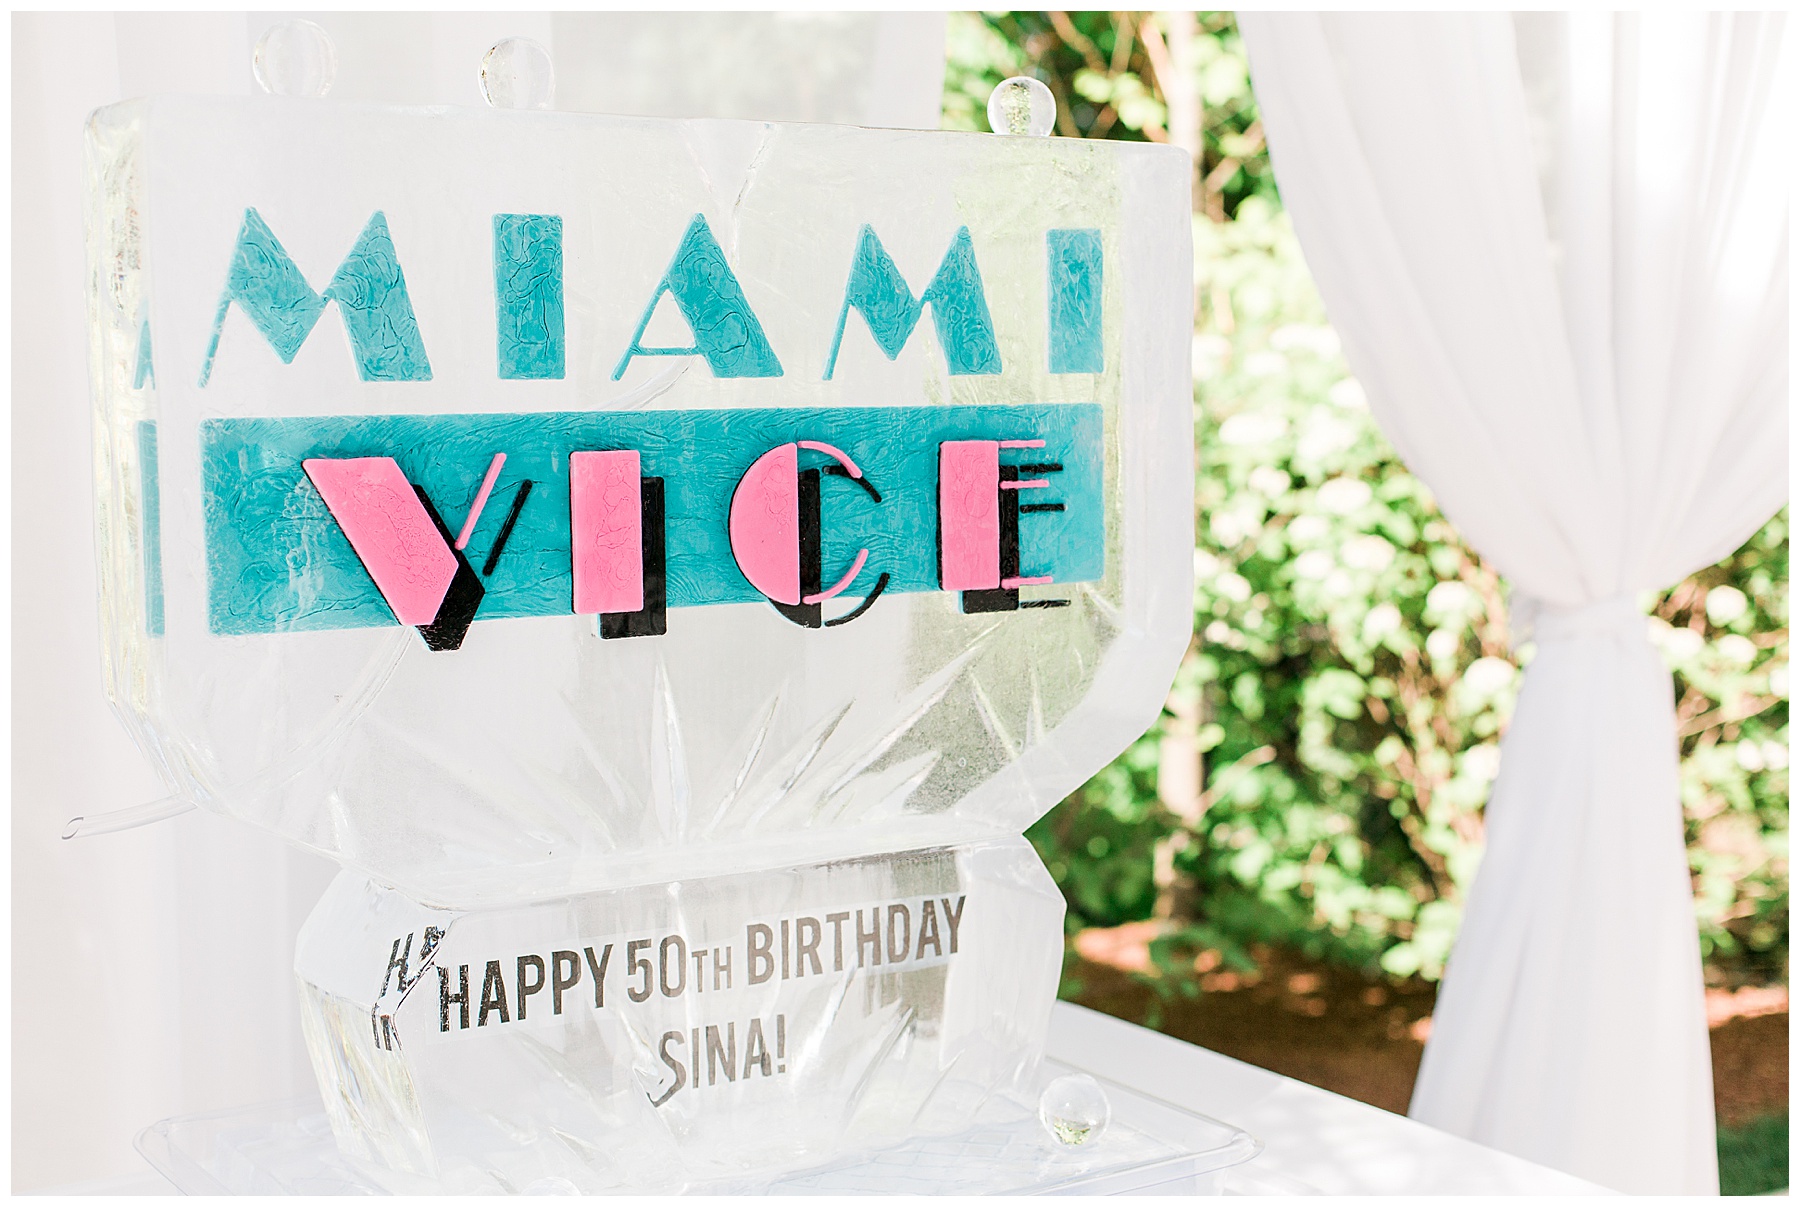 a Miami vice themed ice luge for a 50th birthday party